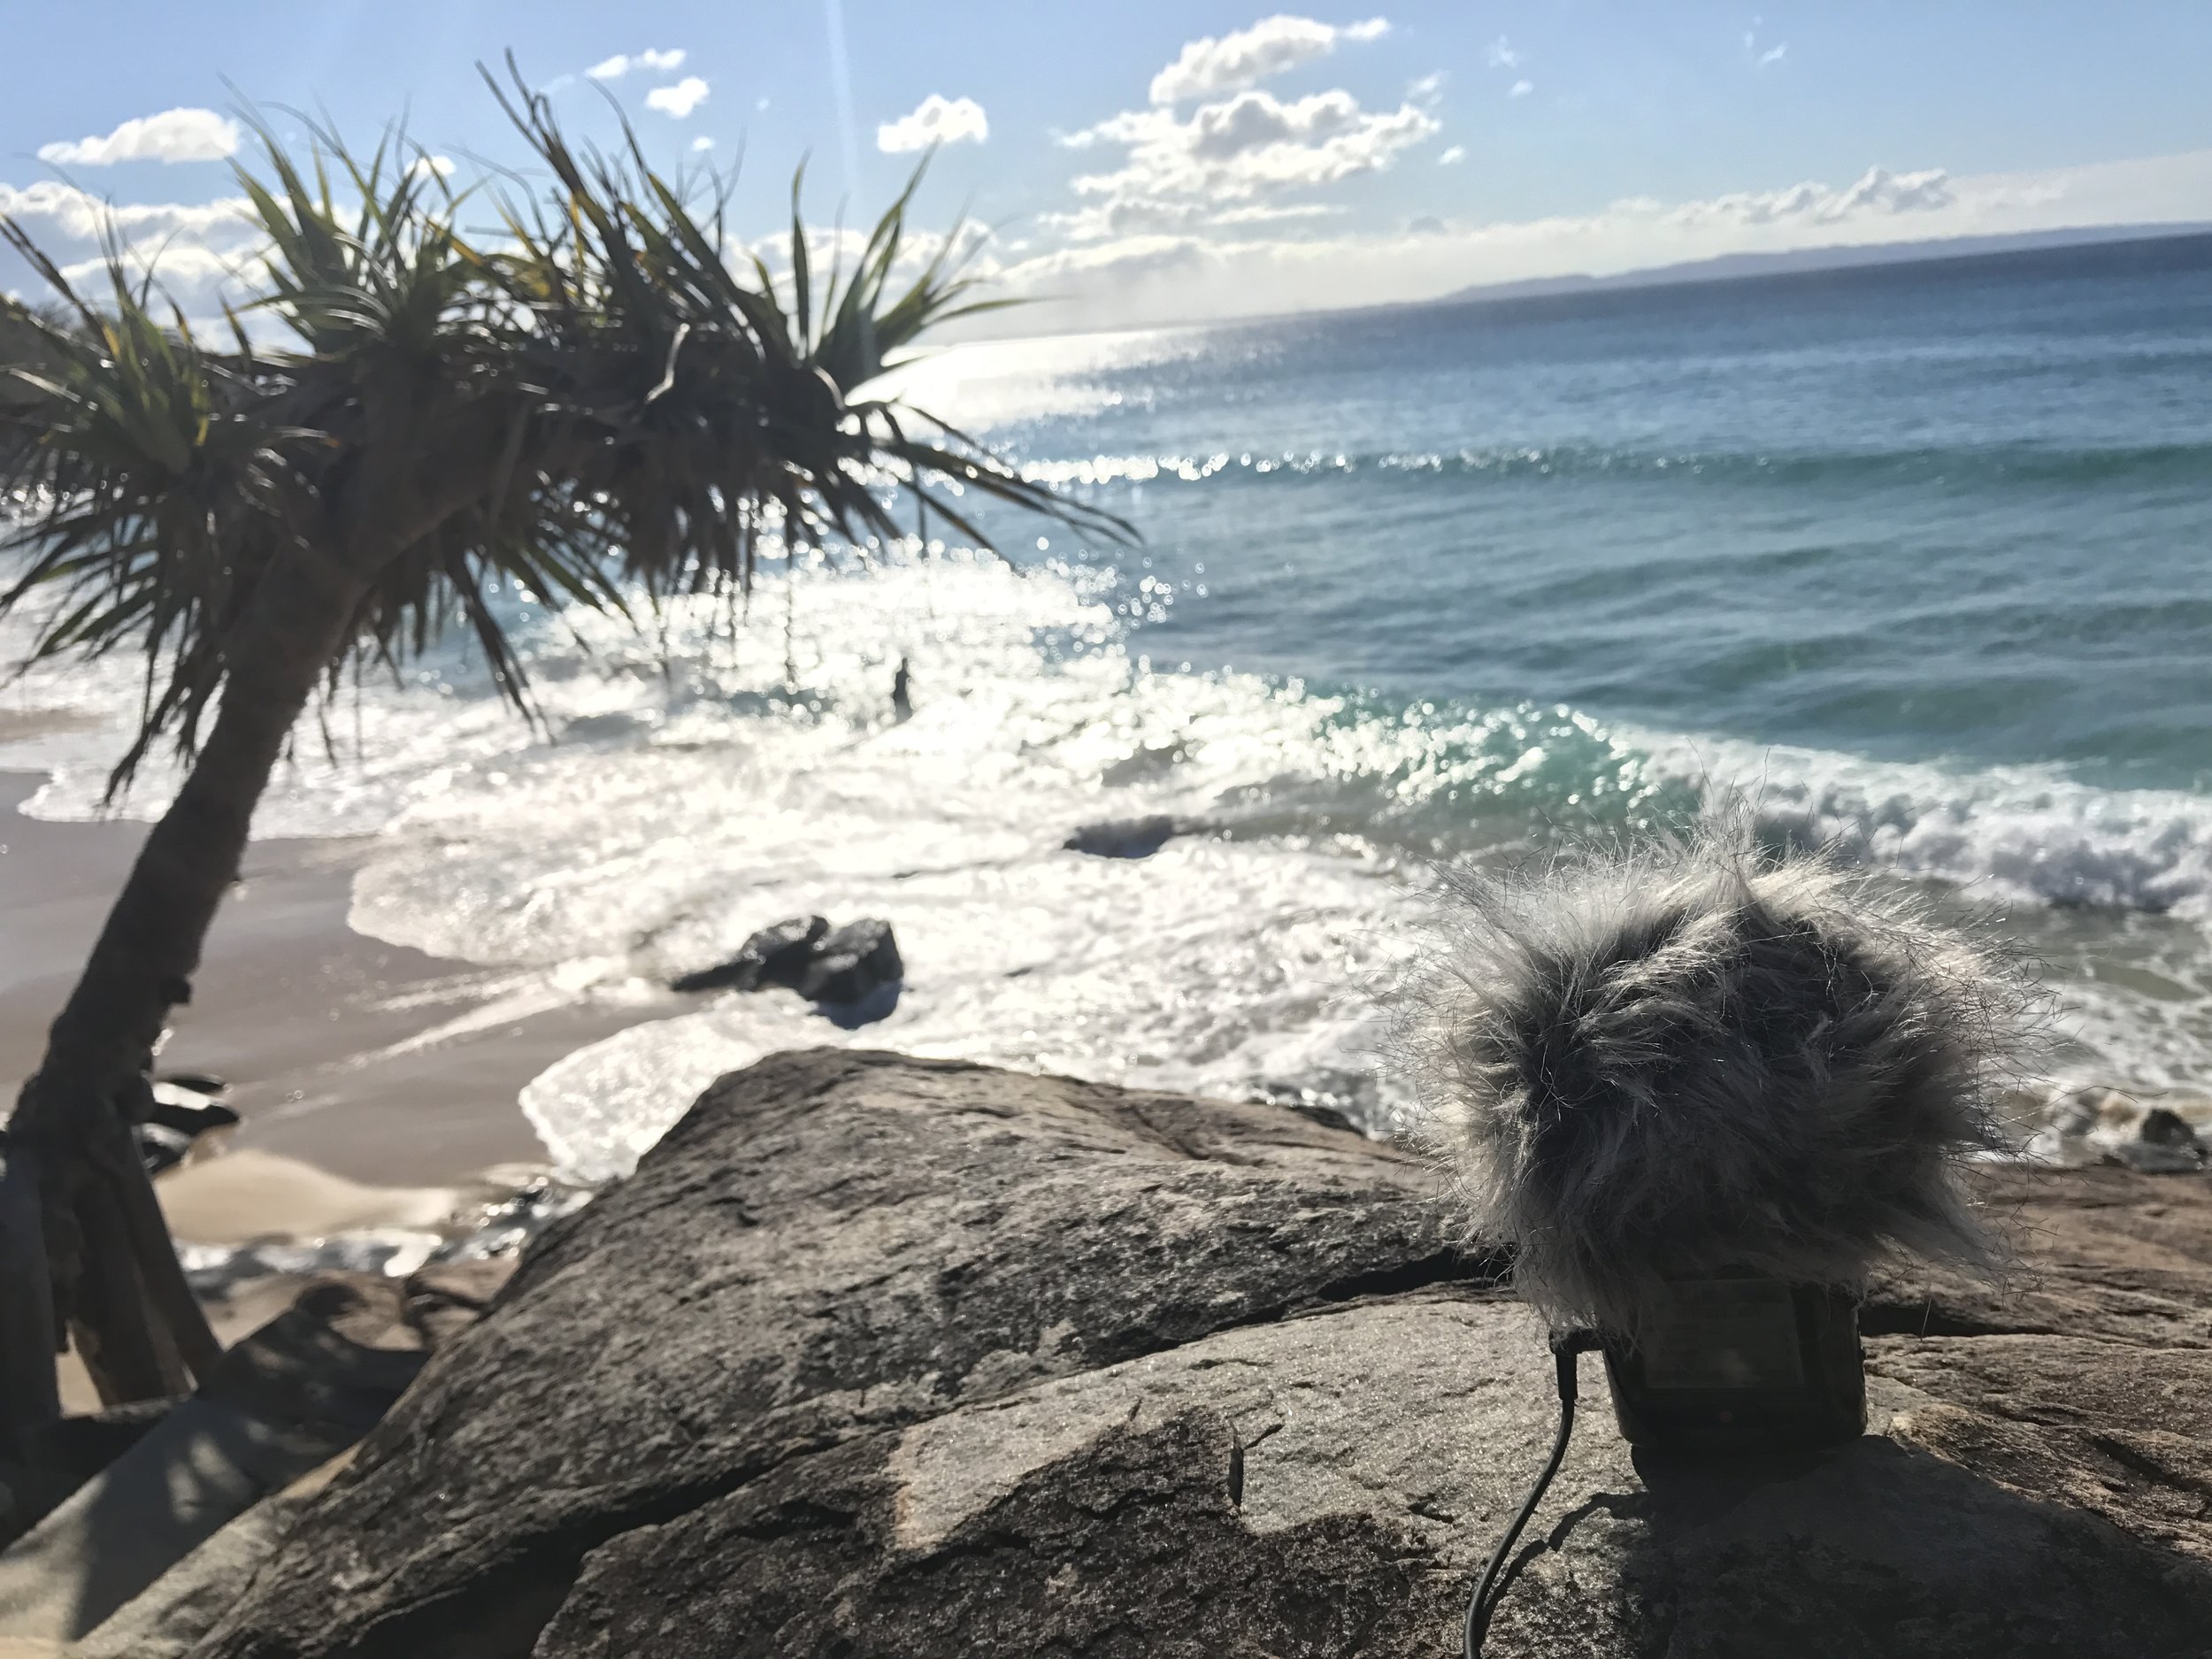 Quick wave atmos recording in Noosa with Zoom H2n in it's Ambisonic mode